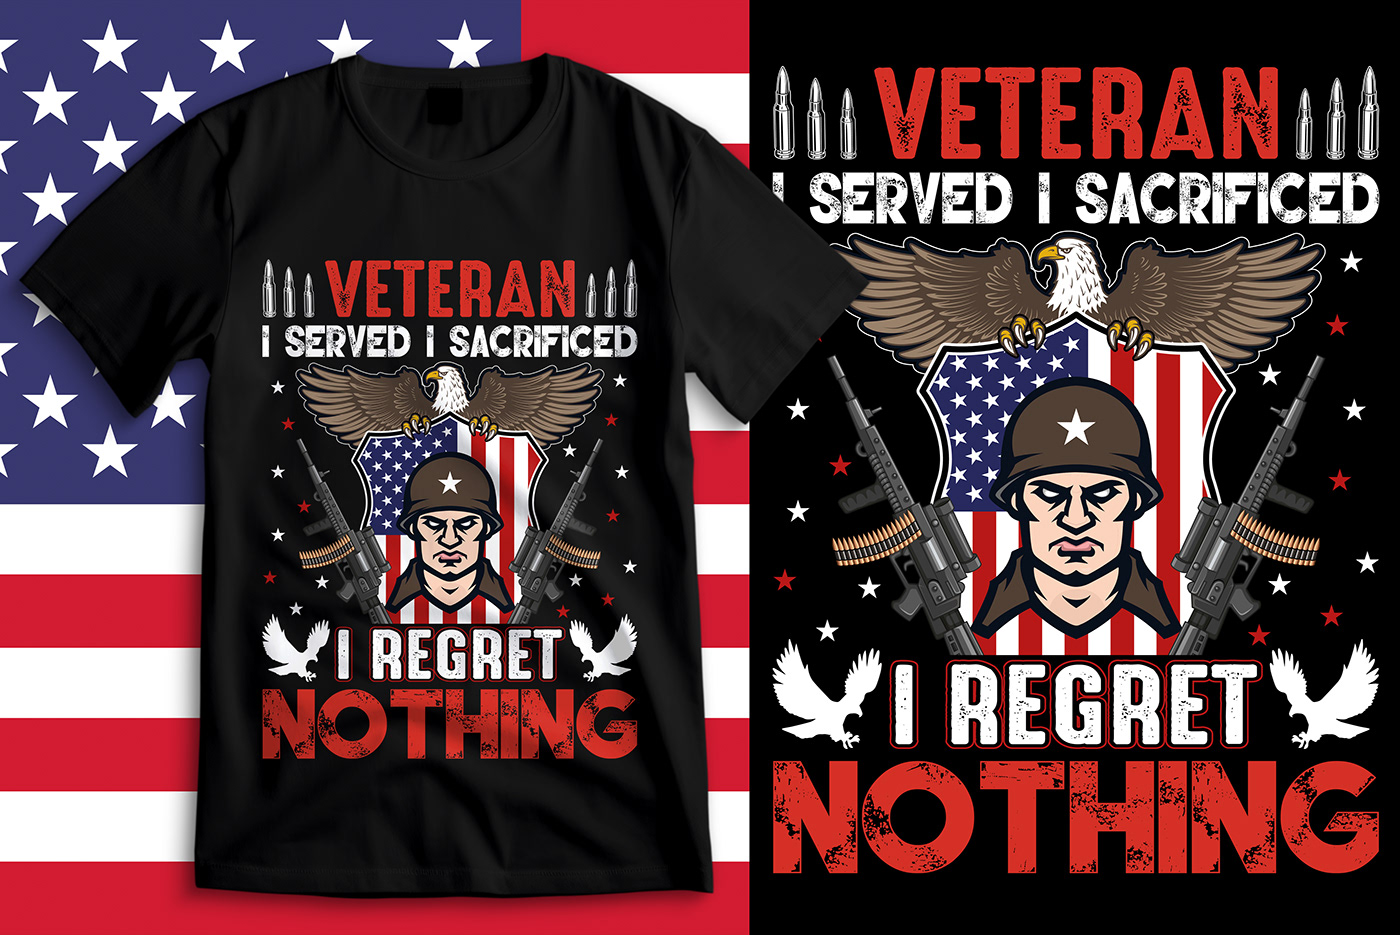 t-shirts T-Shirt Design graphic design  Graphic Designer us veteran t-shirt 4th of July usa independence day design ILLUSTRATION  4th Of July t-shirt